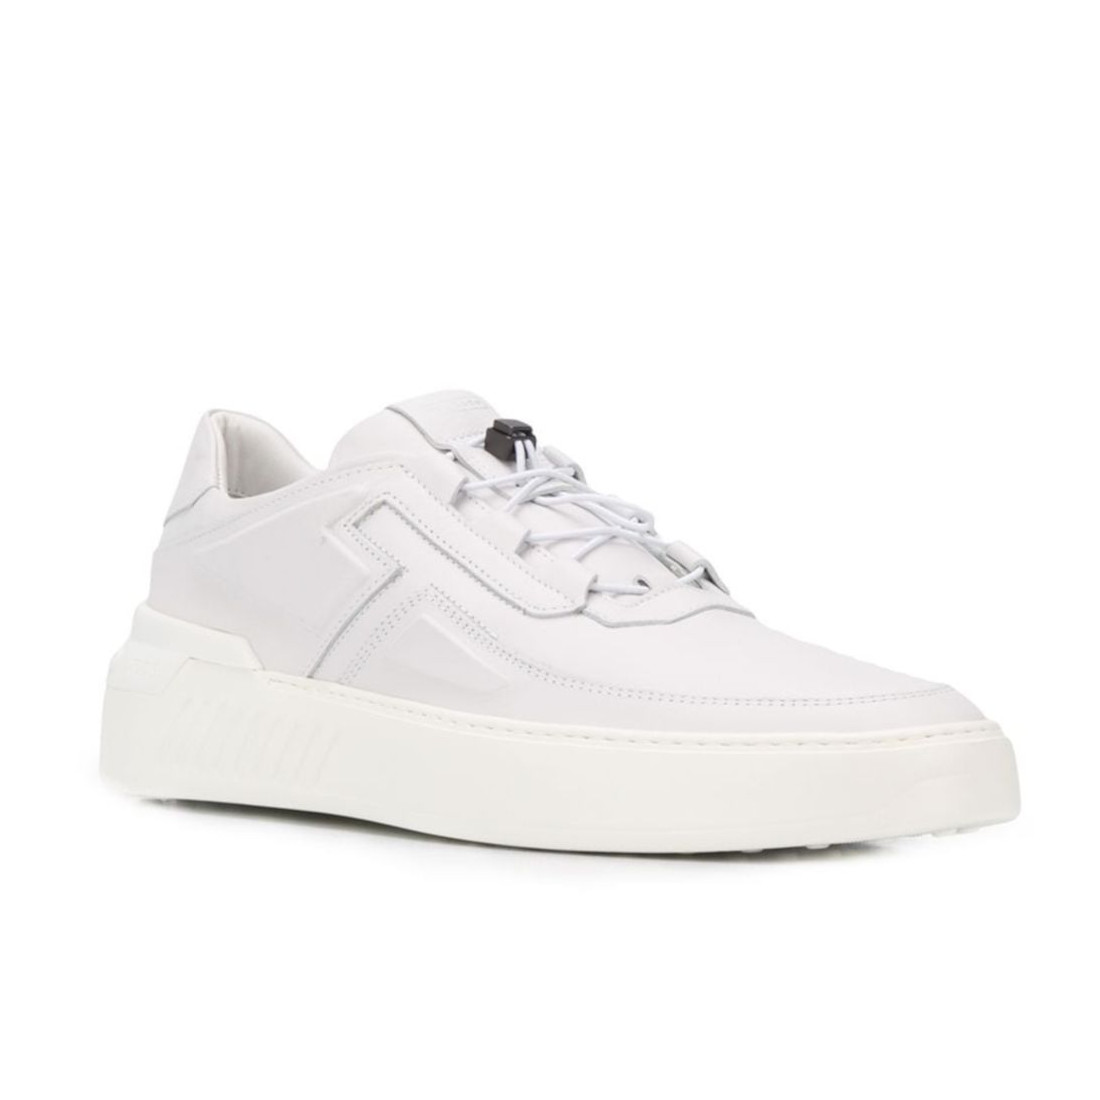 No Code X sneakers in white leather